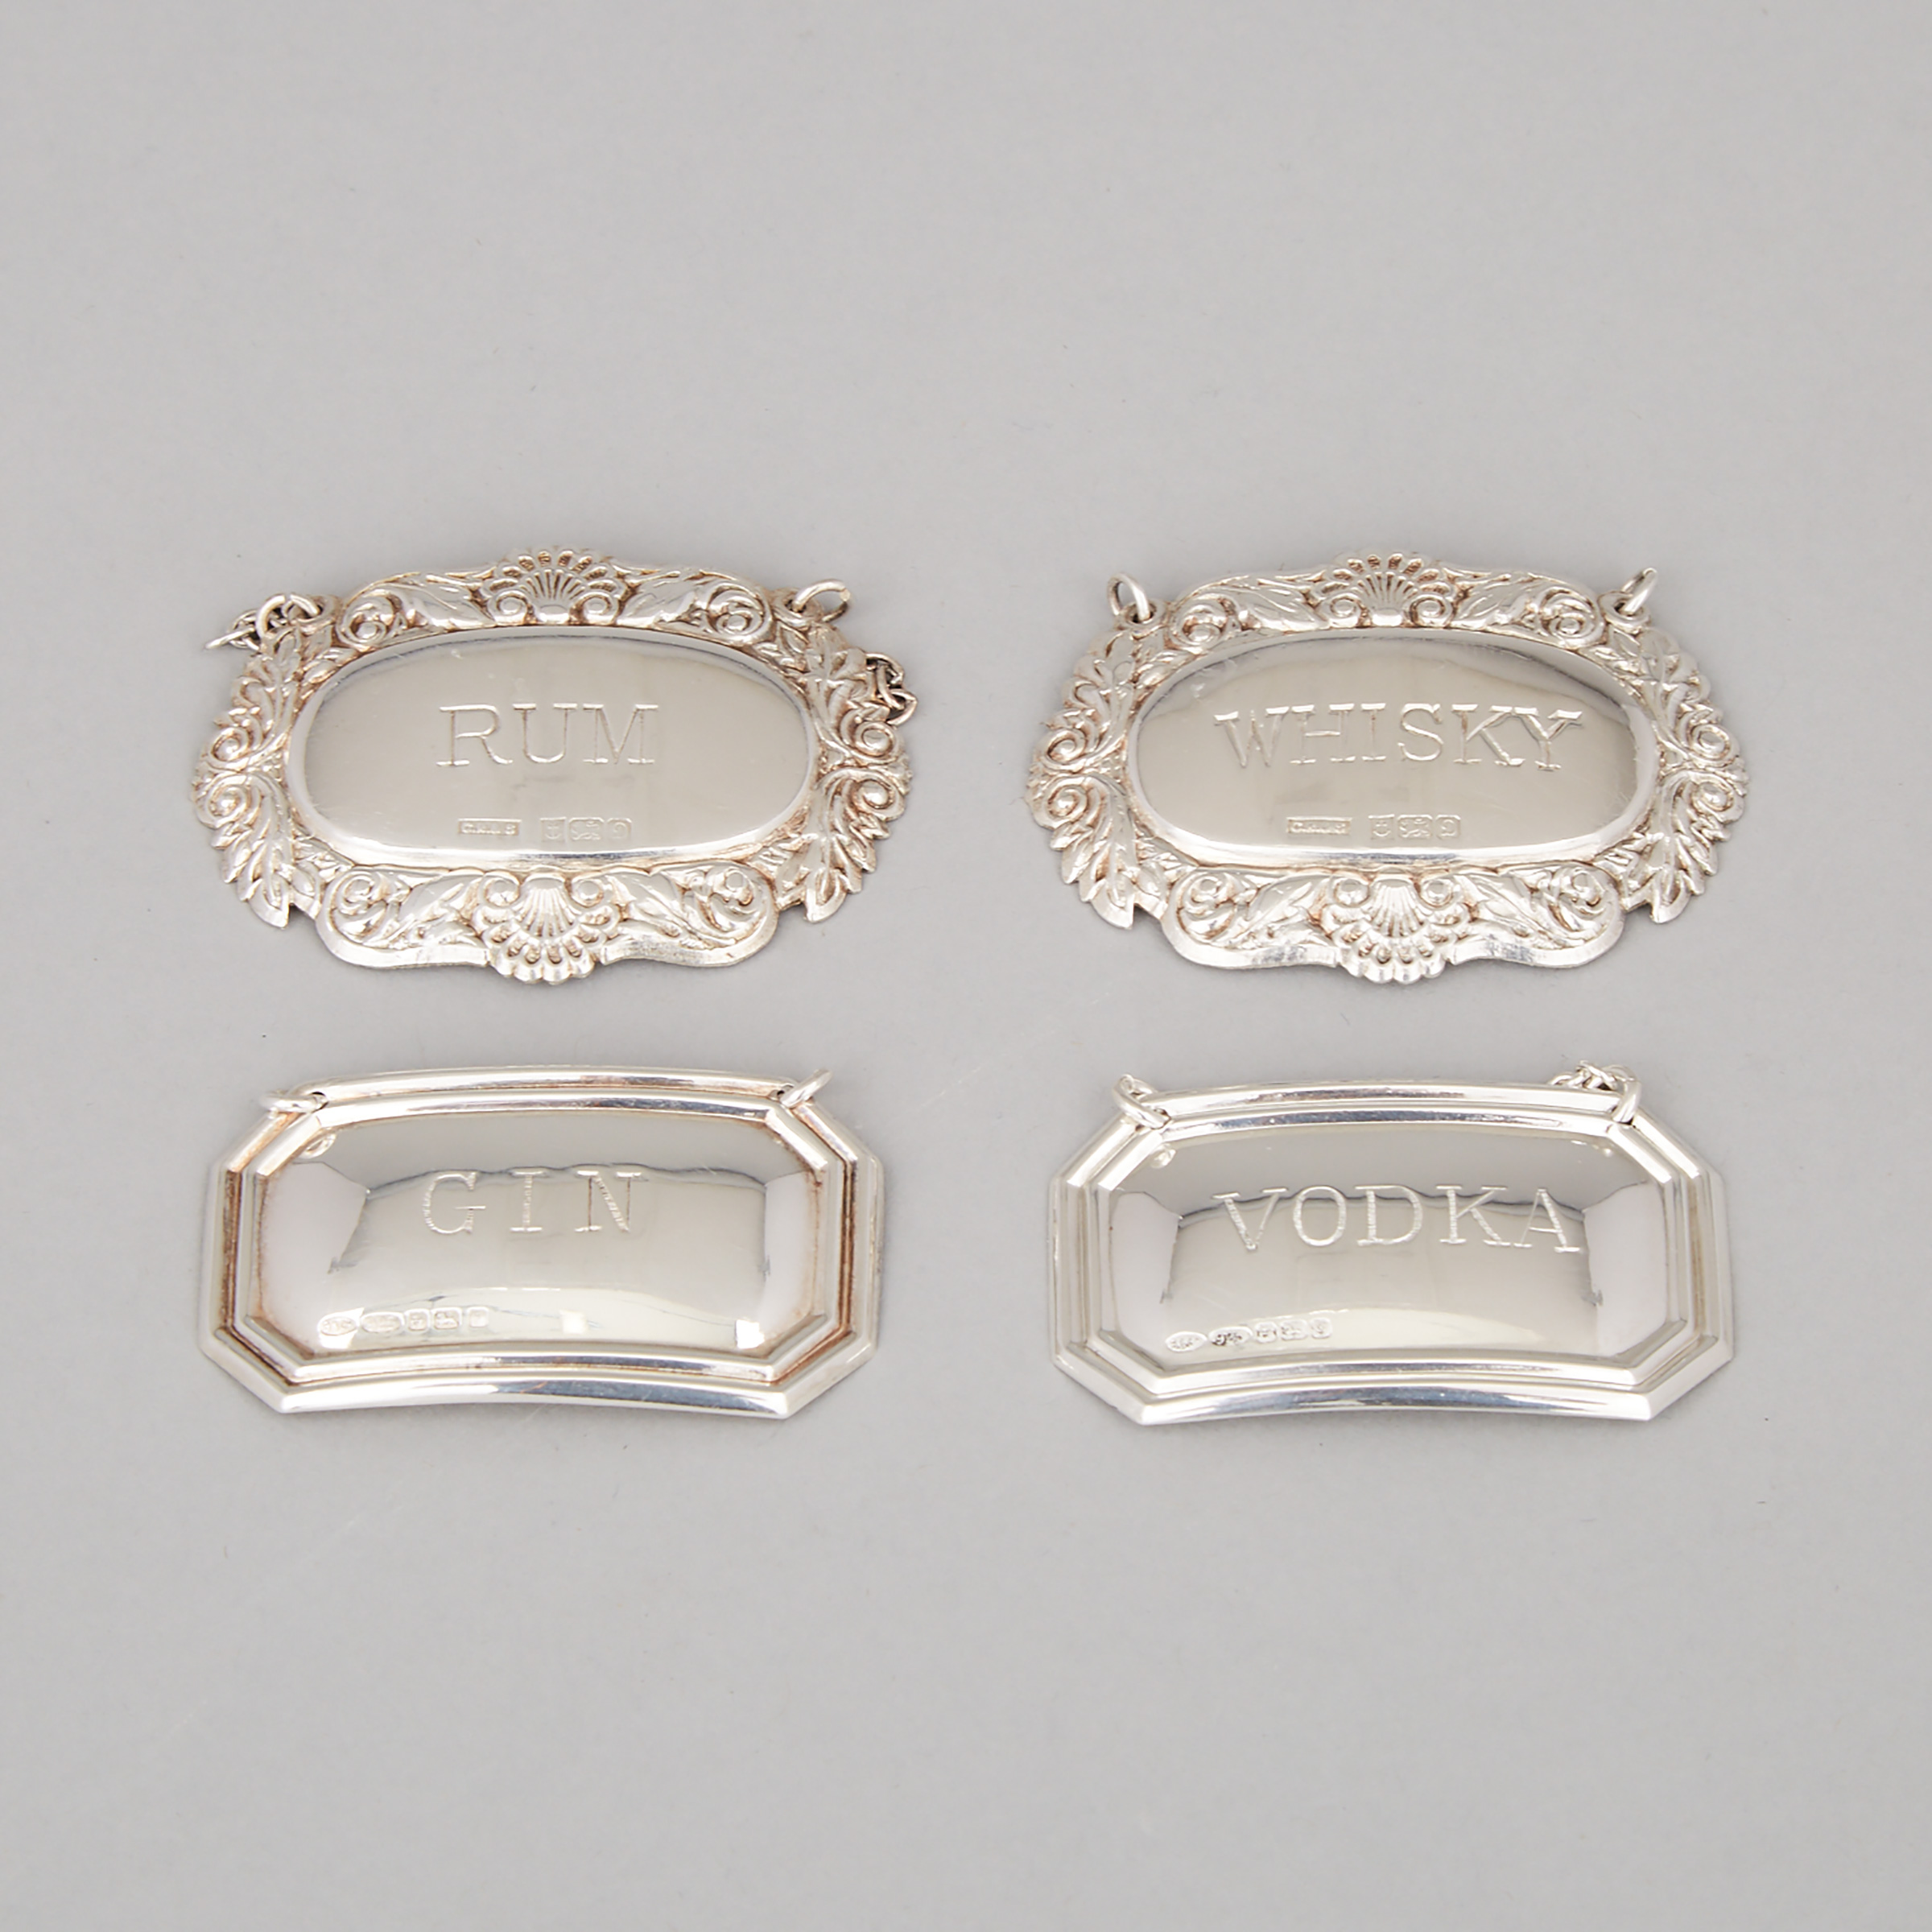 Four English Silver Spirit Decanter Labels, C. Robathan & Son and W.I. Broadway & Co., Birmingham, 1978-2006